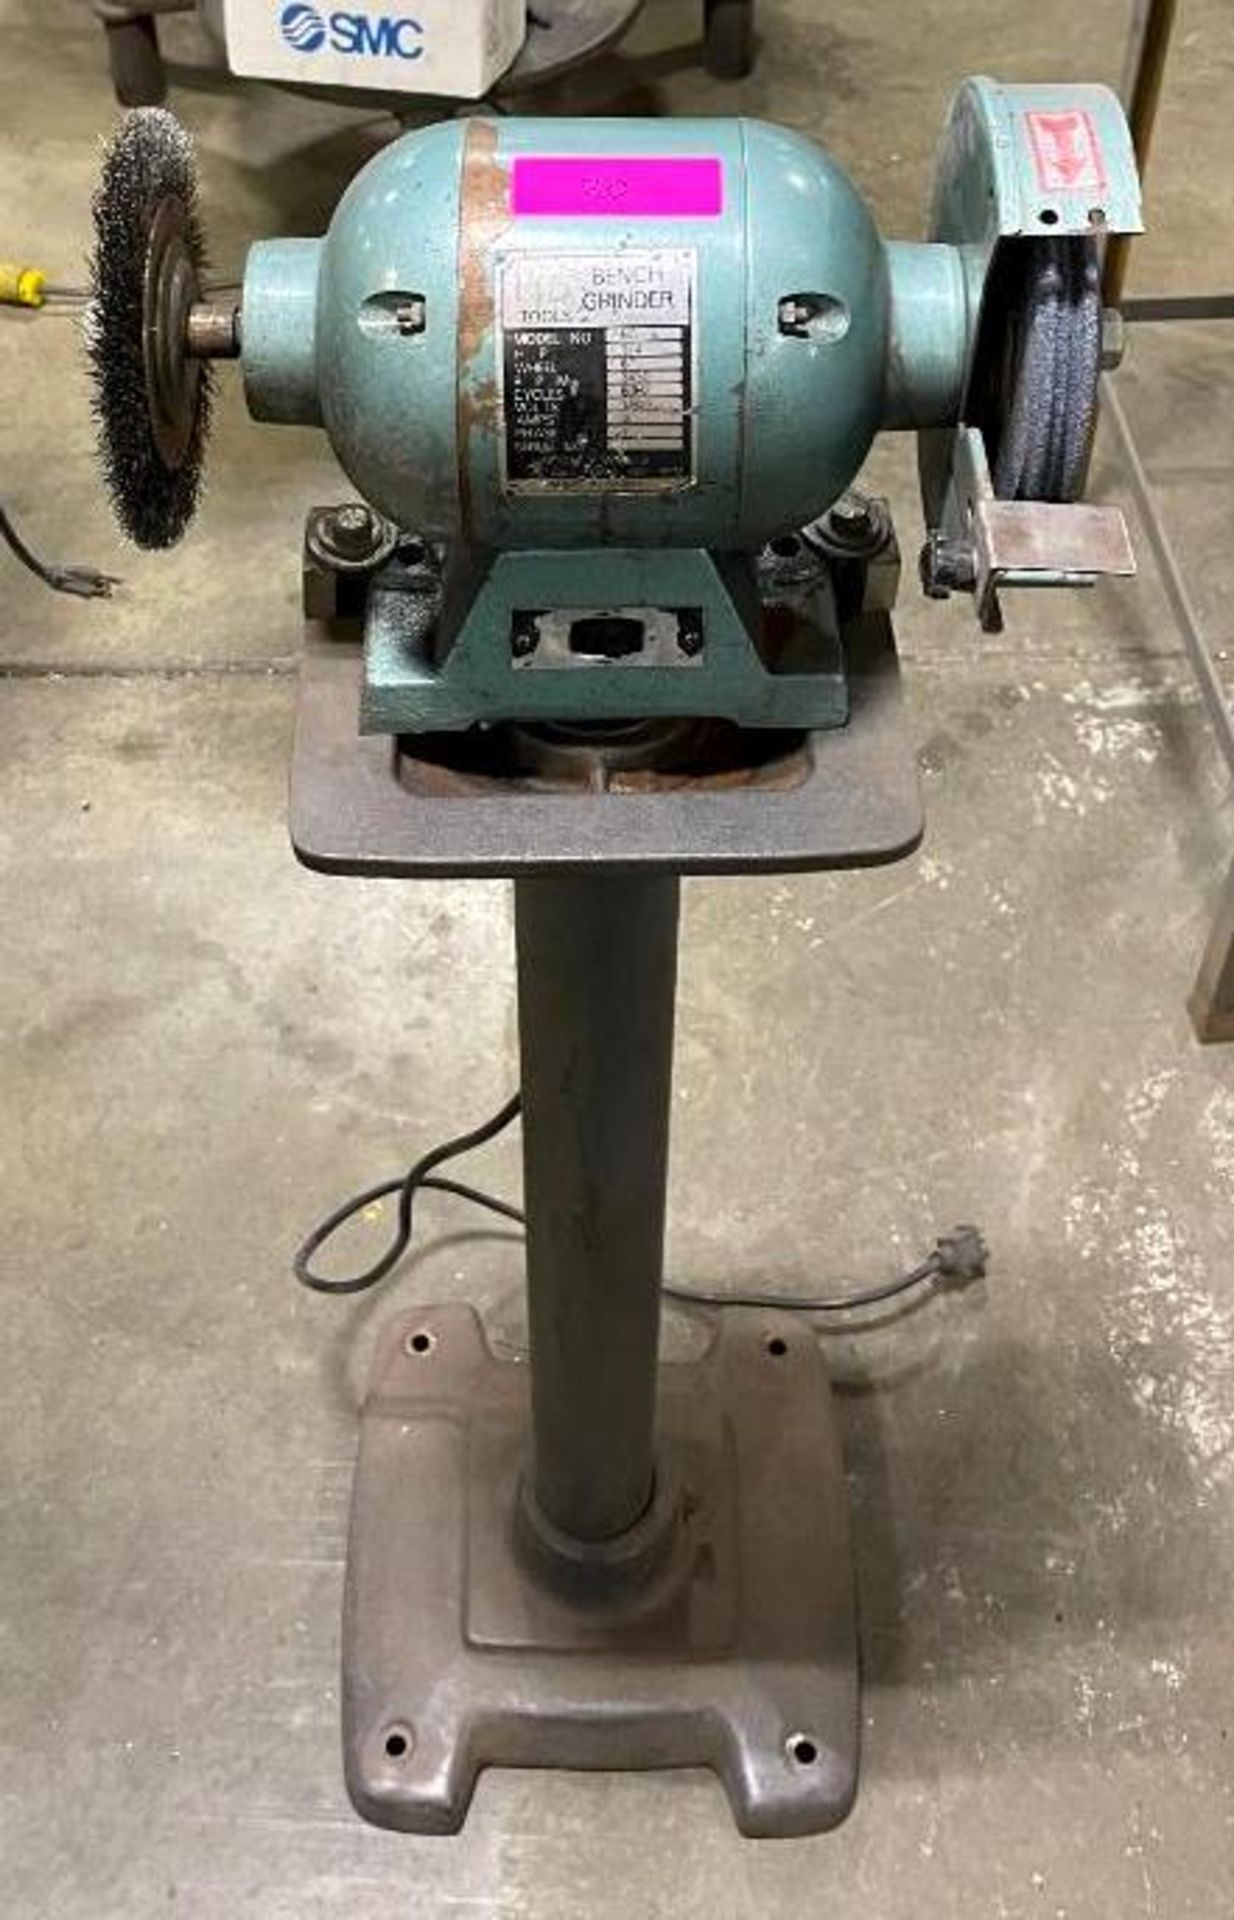 HB TOOLS 3/4 HP 6" BENCH GRINDER ON STAND BRAND/MODEL: BG-6 LOCATION: WAREHOUSE QTY: 1